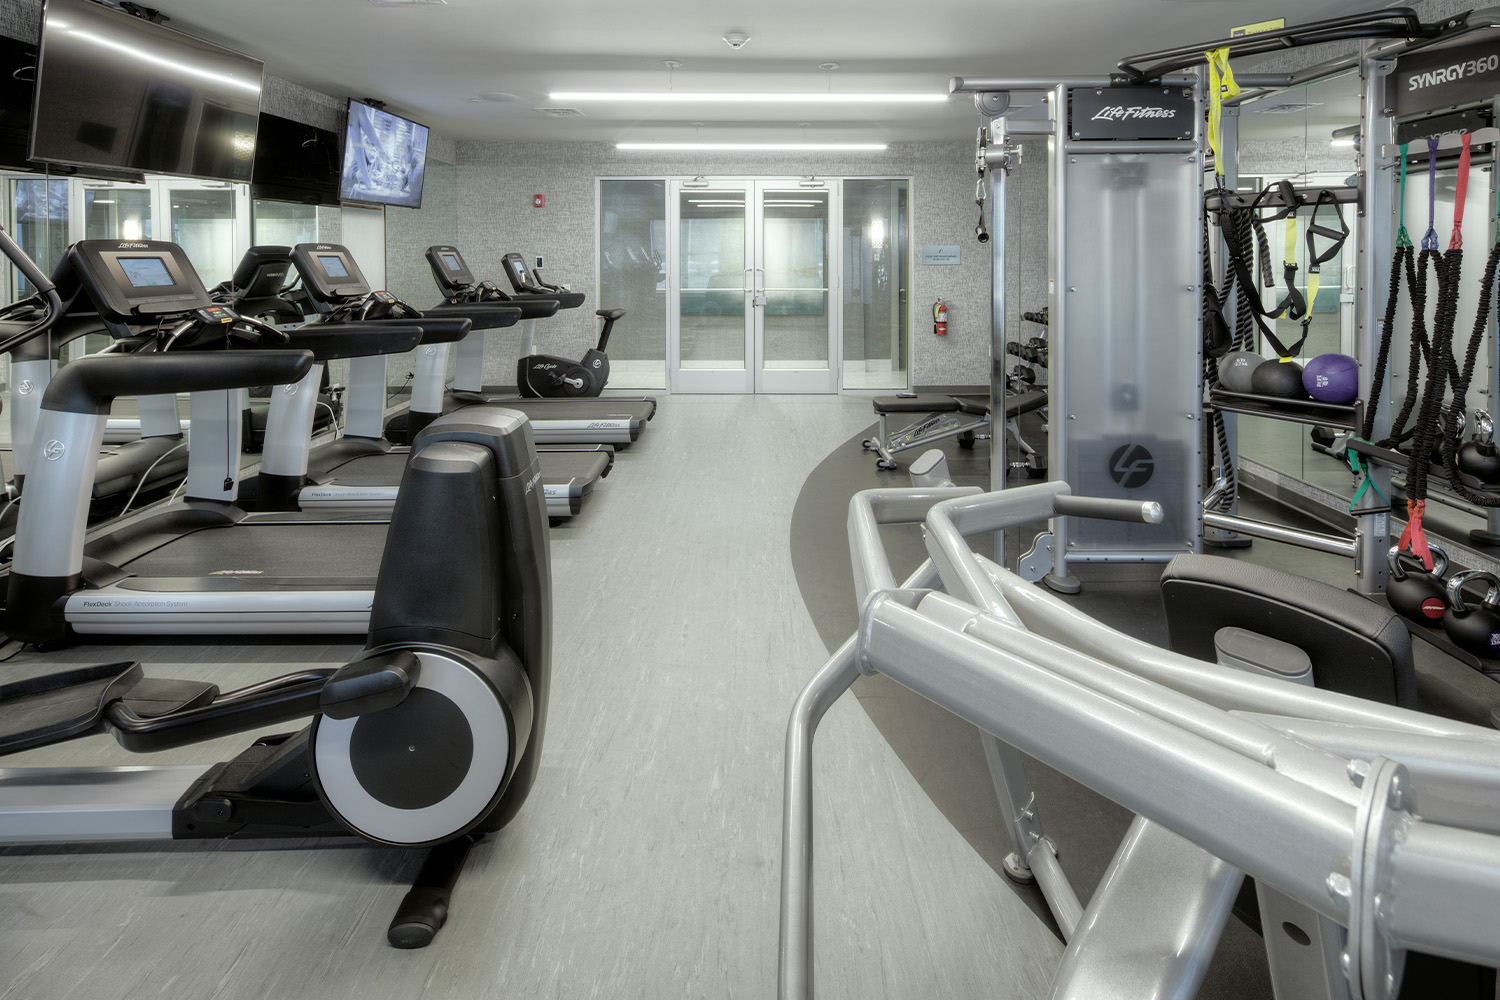 Clean gym with minimalist style light fixtures, and exercise equipment 